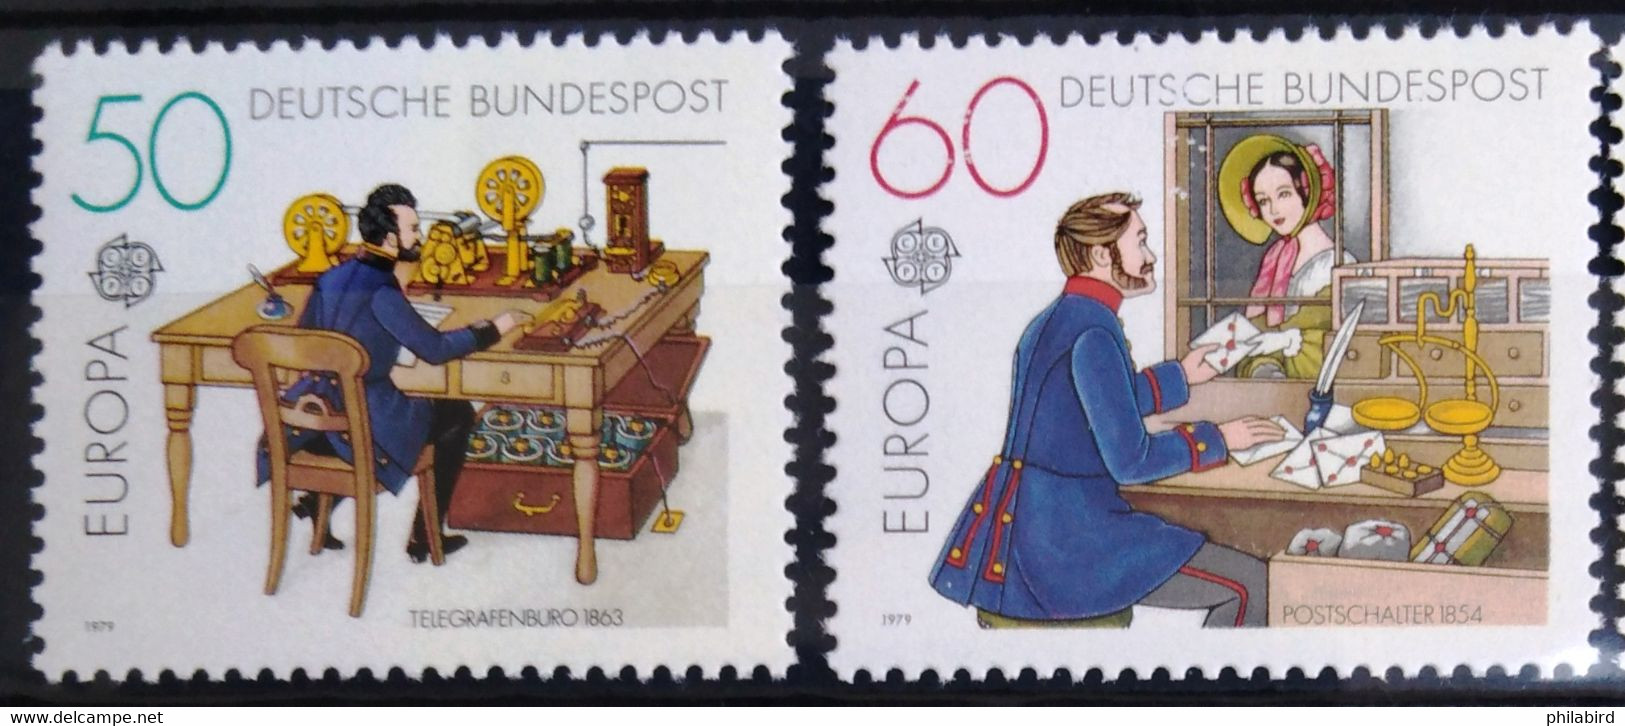 EUROPA 1979 - ALLEMAGNE                    N° 855/856                        NEUF** - 1979